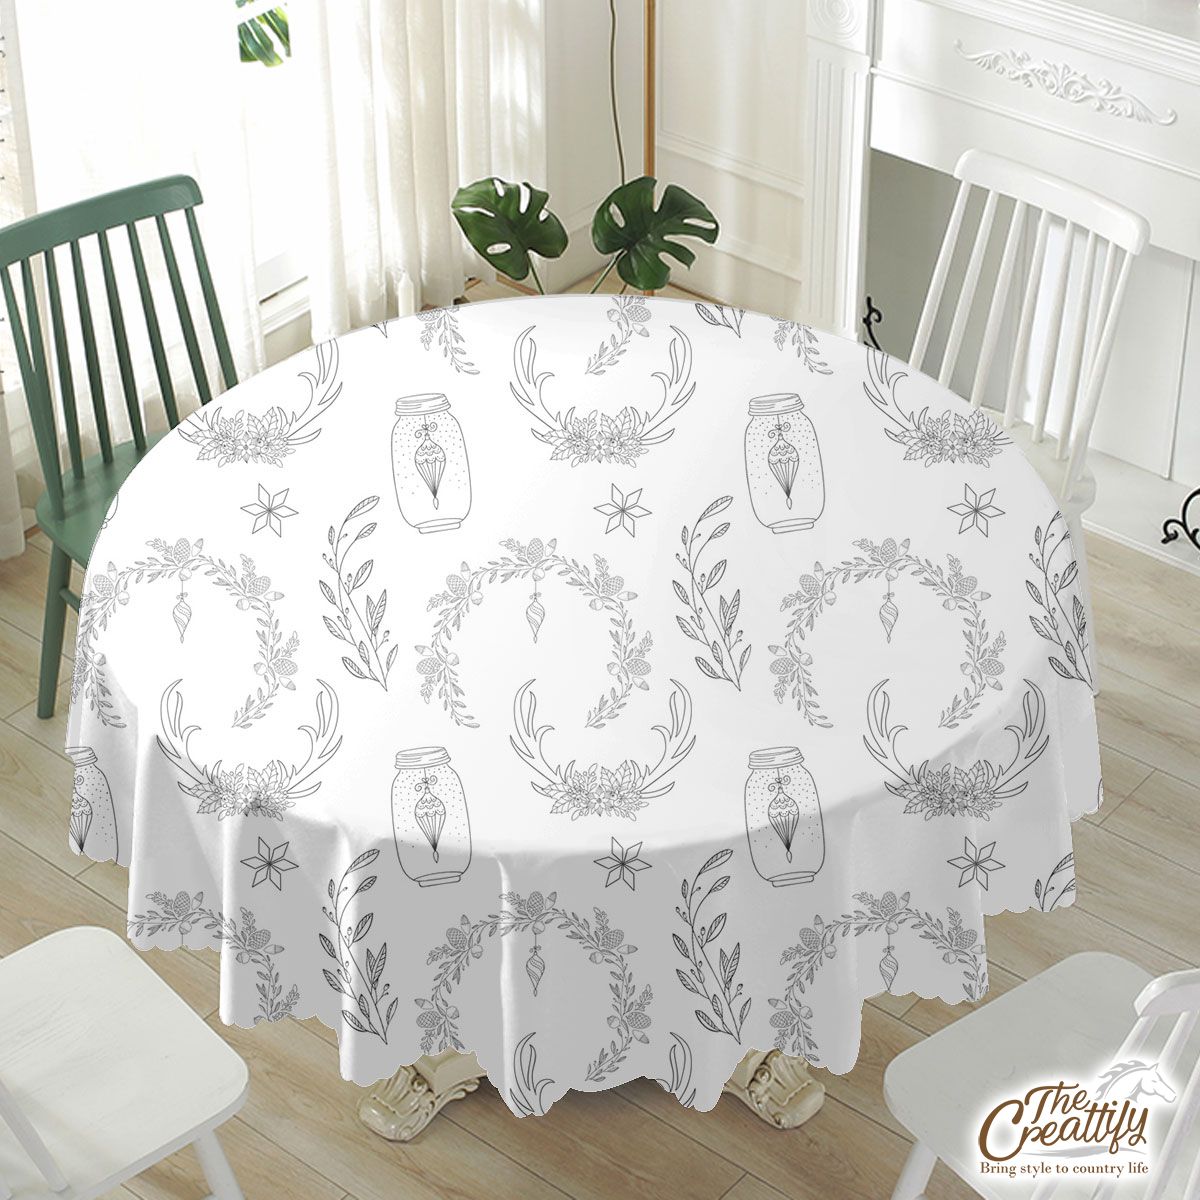 Black And White Christmas Wreath Waterproof Tablecloth